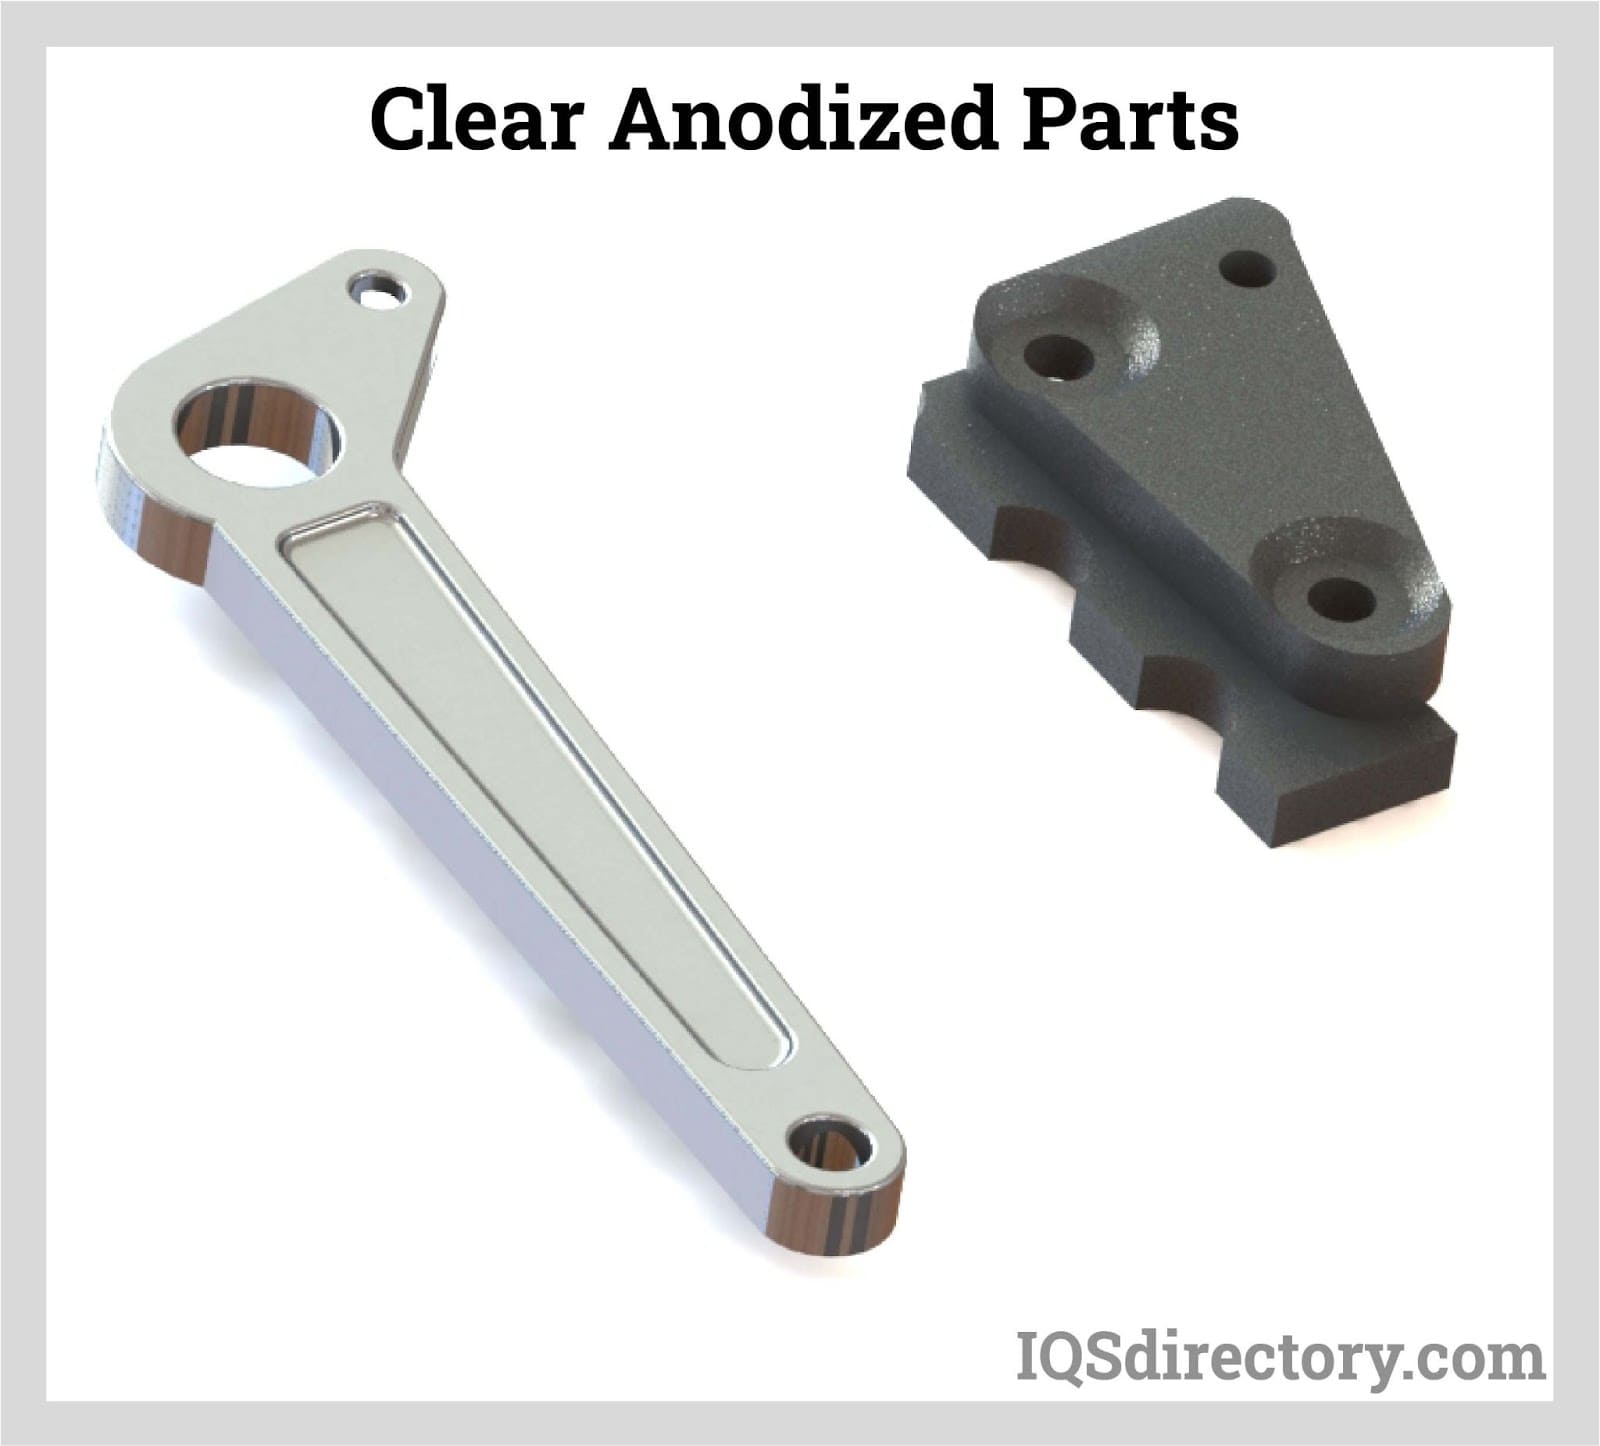 Clear Anodized Parts